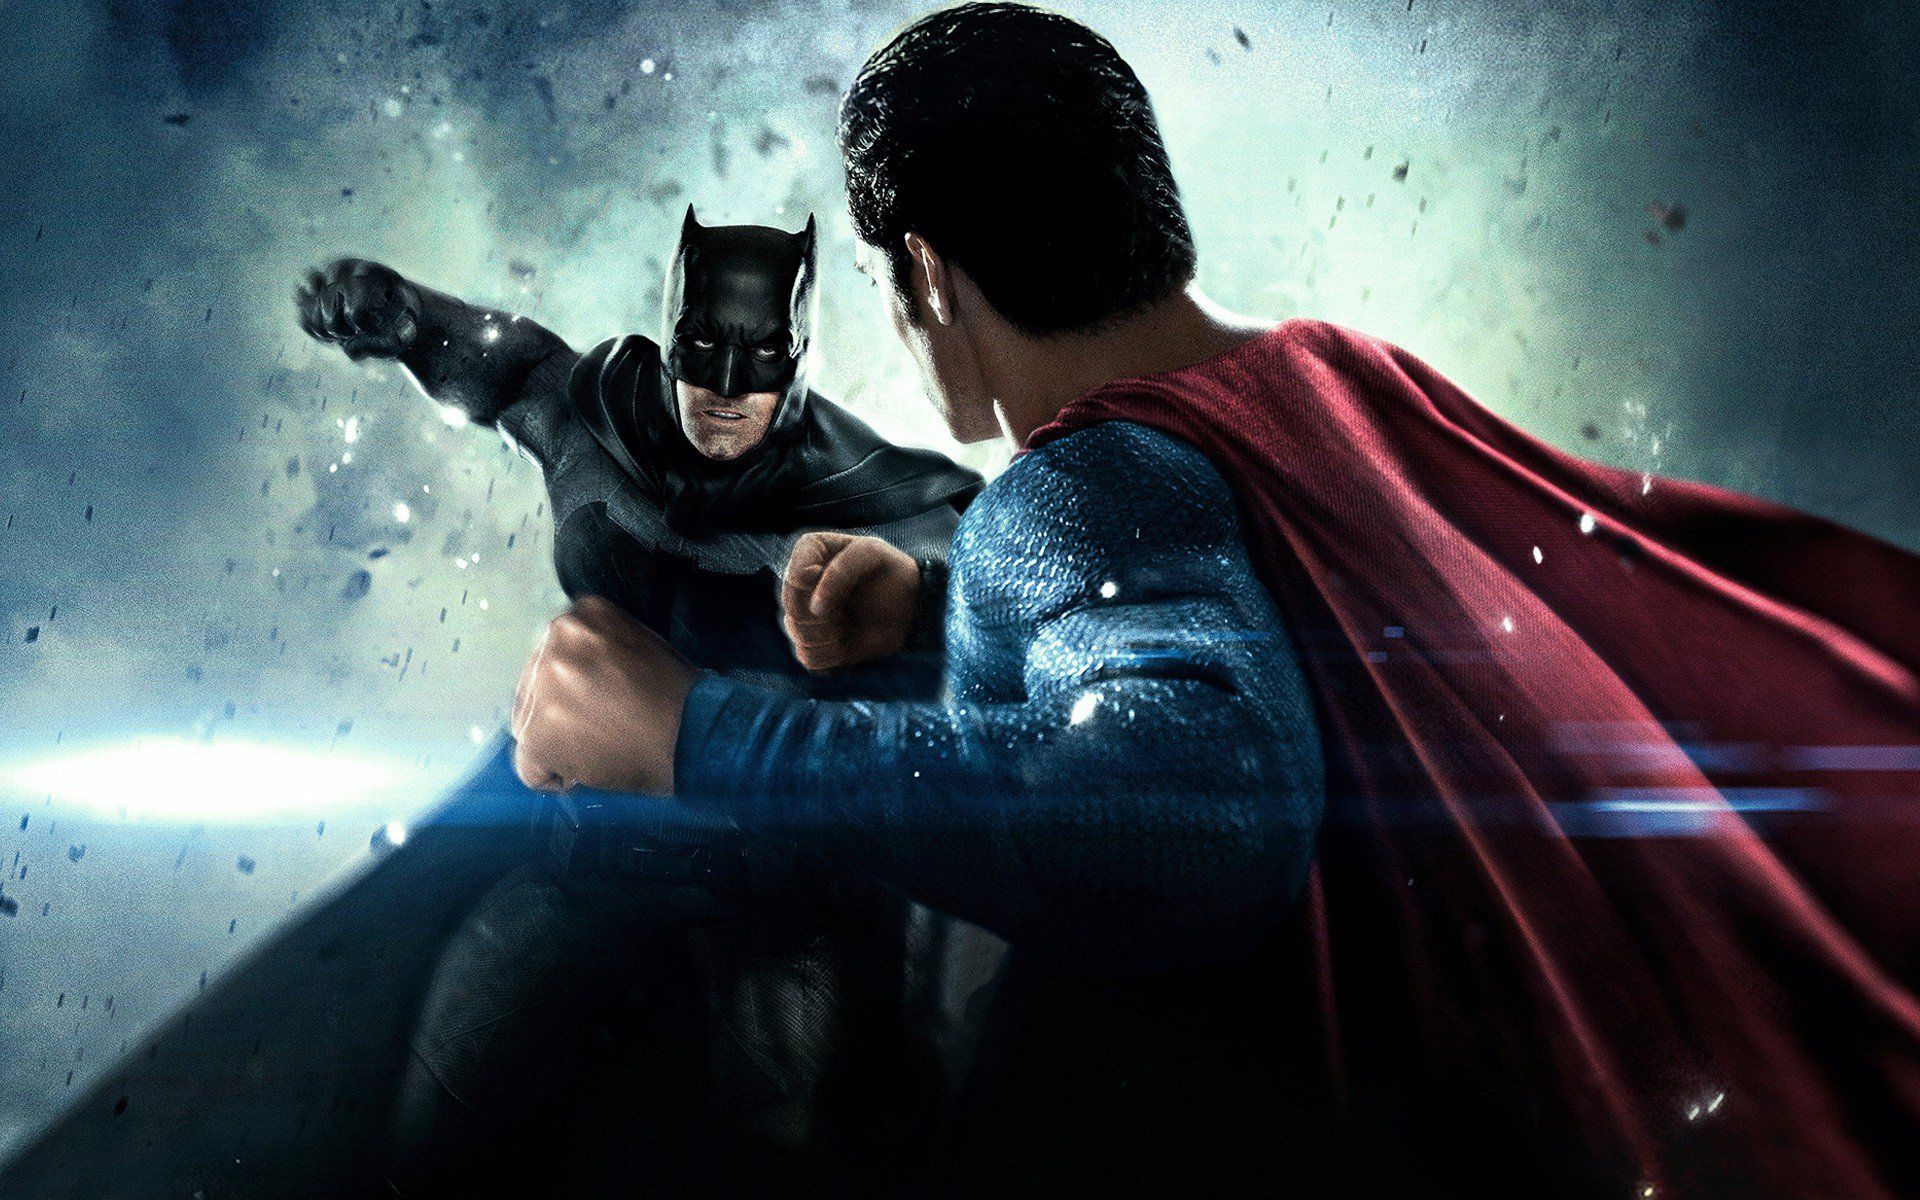 Wait, So Are Henry Cavill And Ben Affleck Done With Superman And Batman?